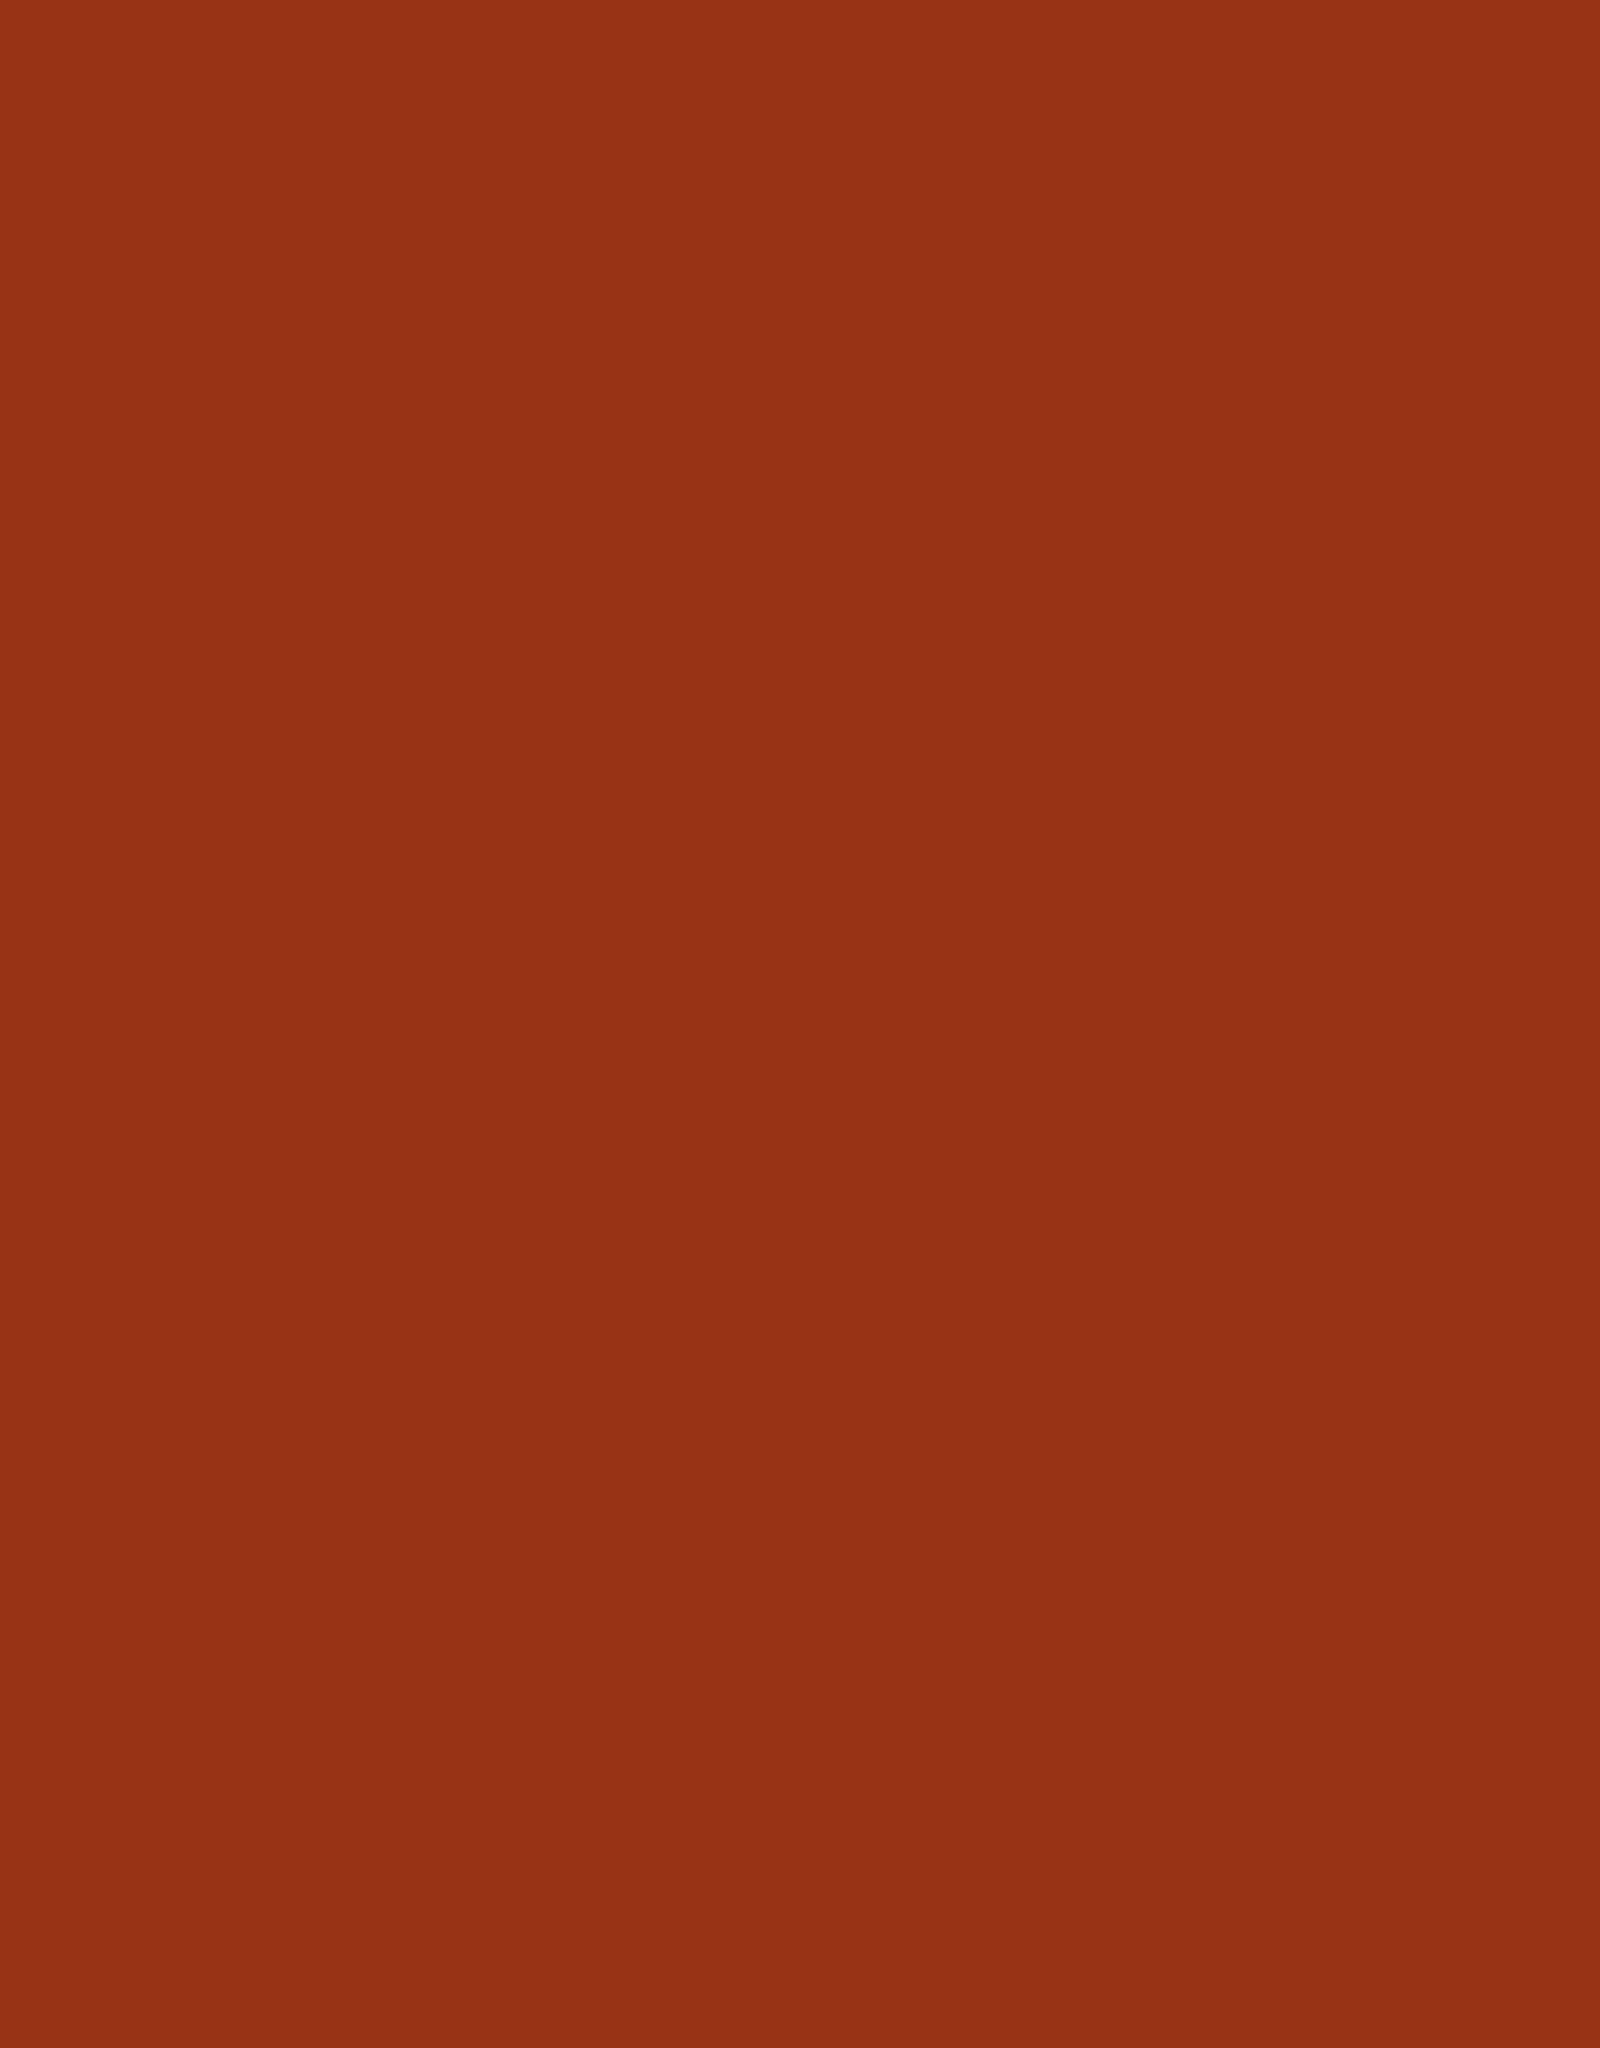 Golden Acrylic Paint HB Series 1 Red Oxide